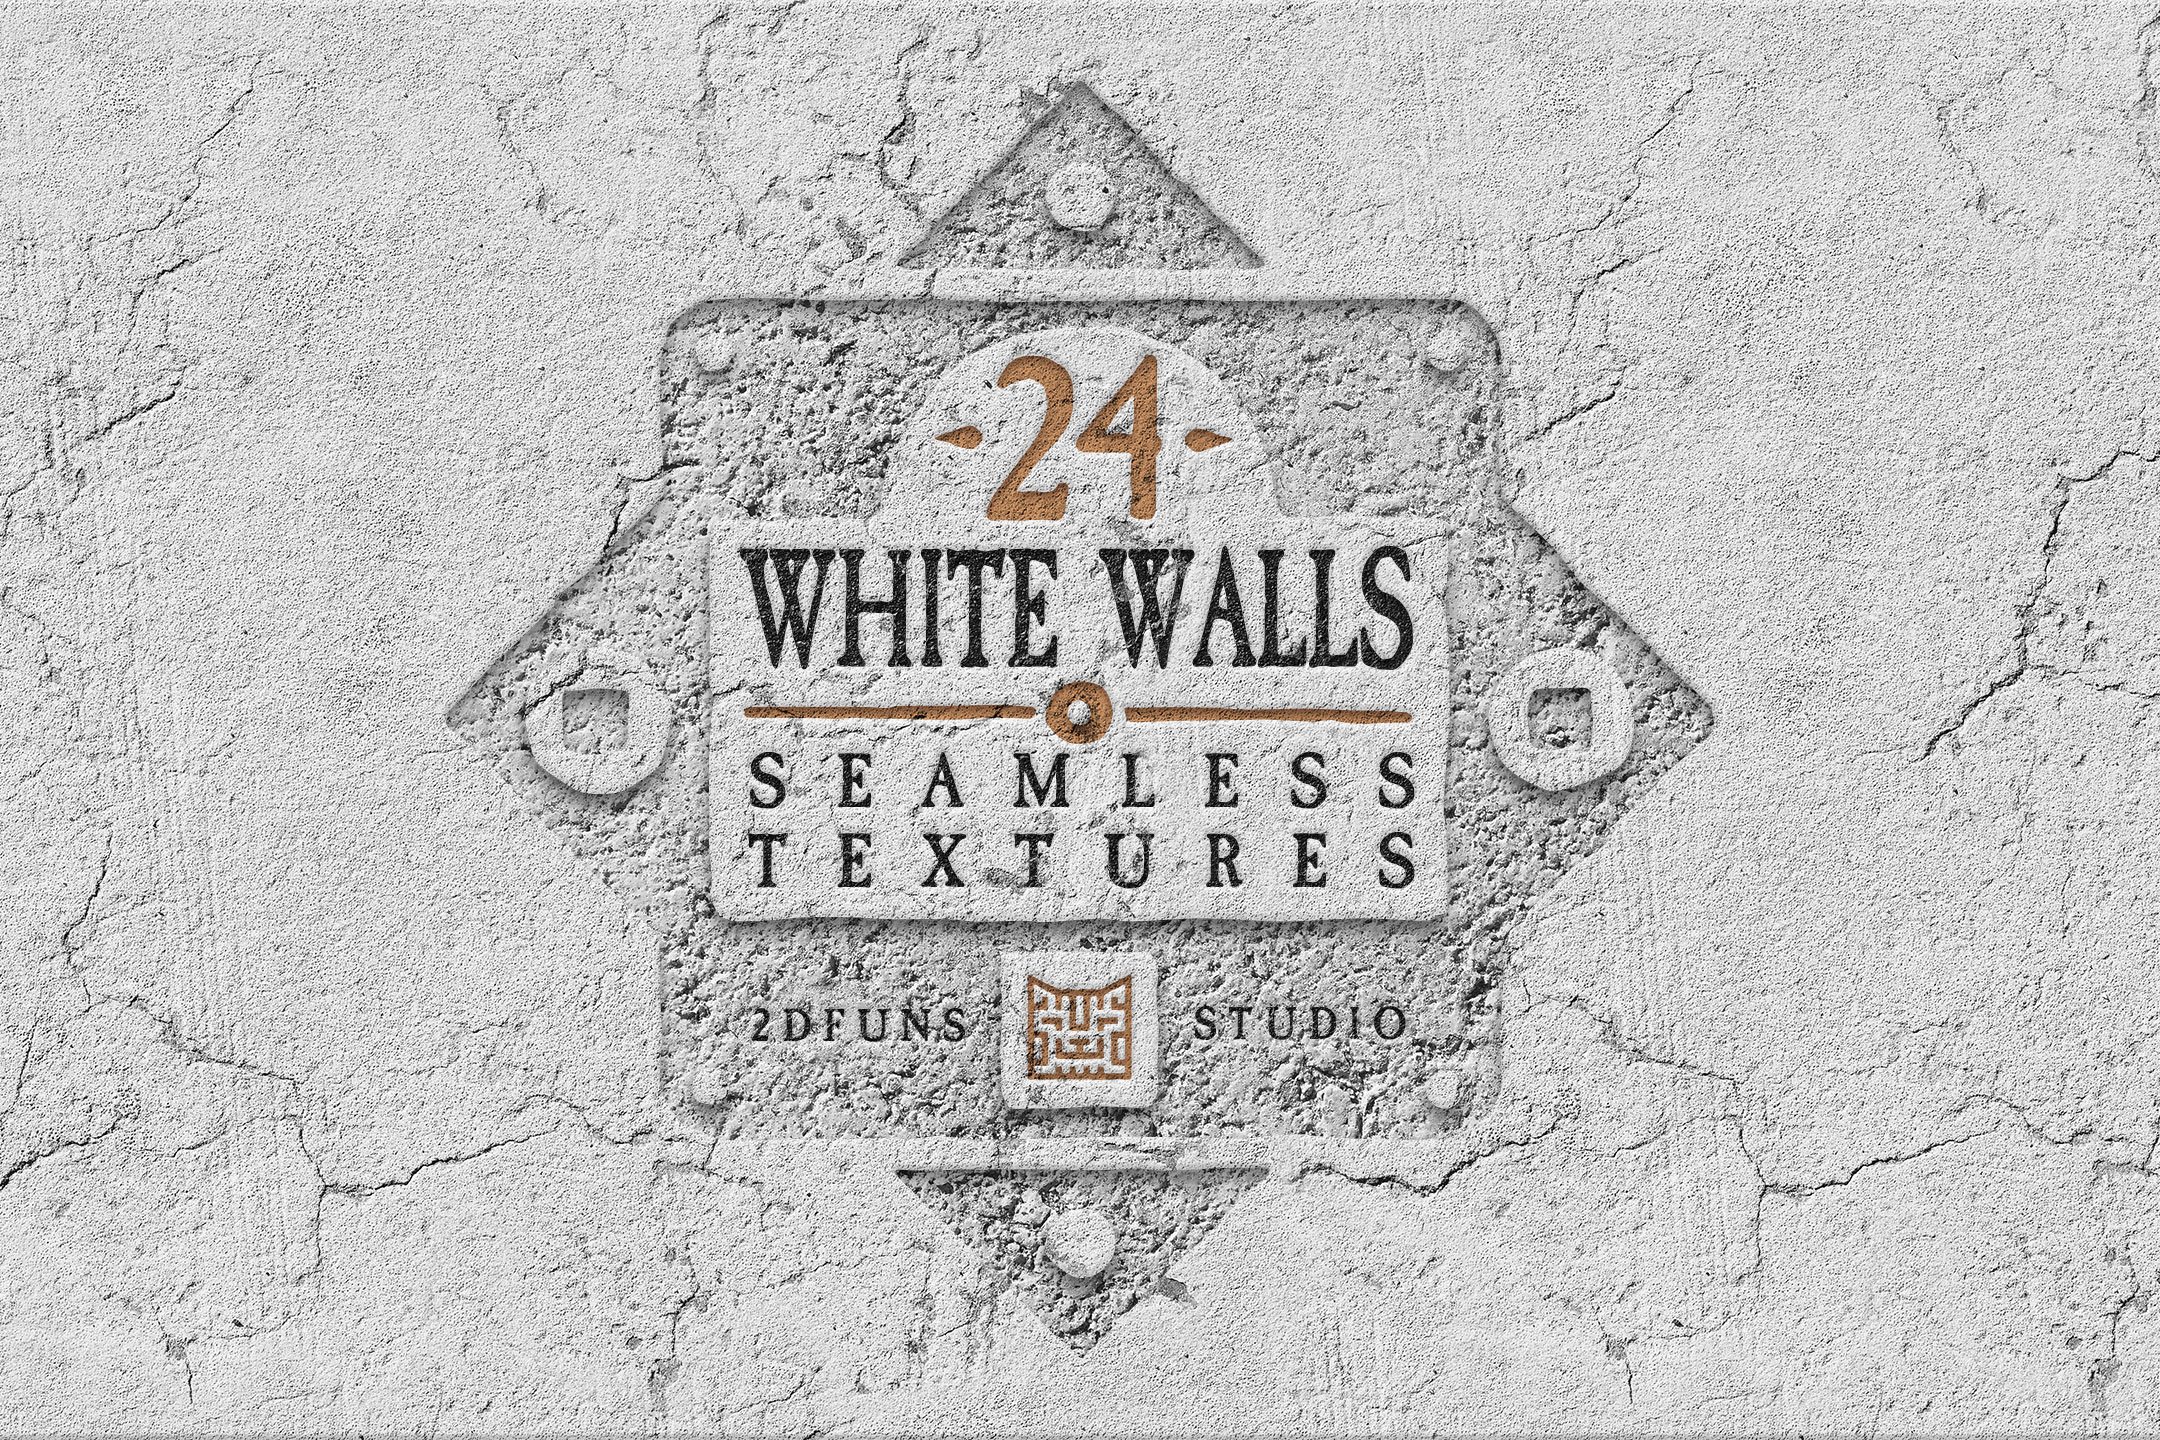 24 WHITE WALLS SEAMLESS TEXTURES cover image.